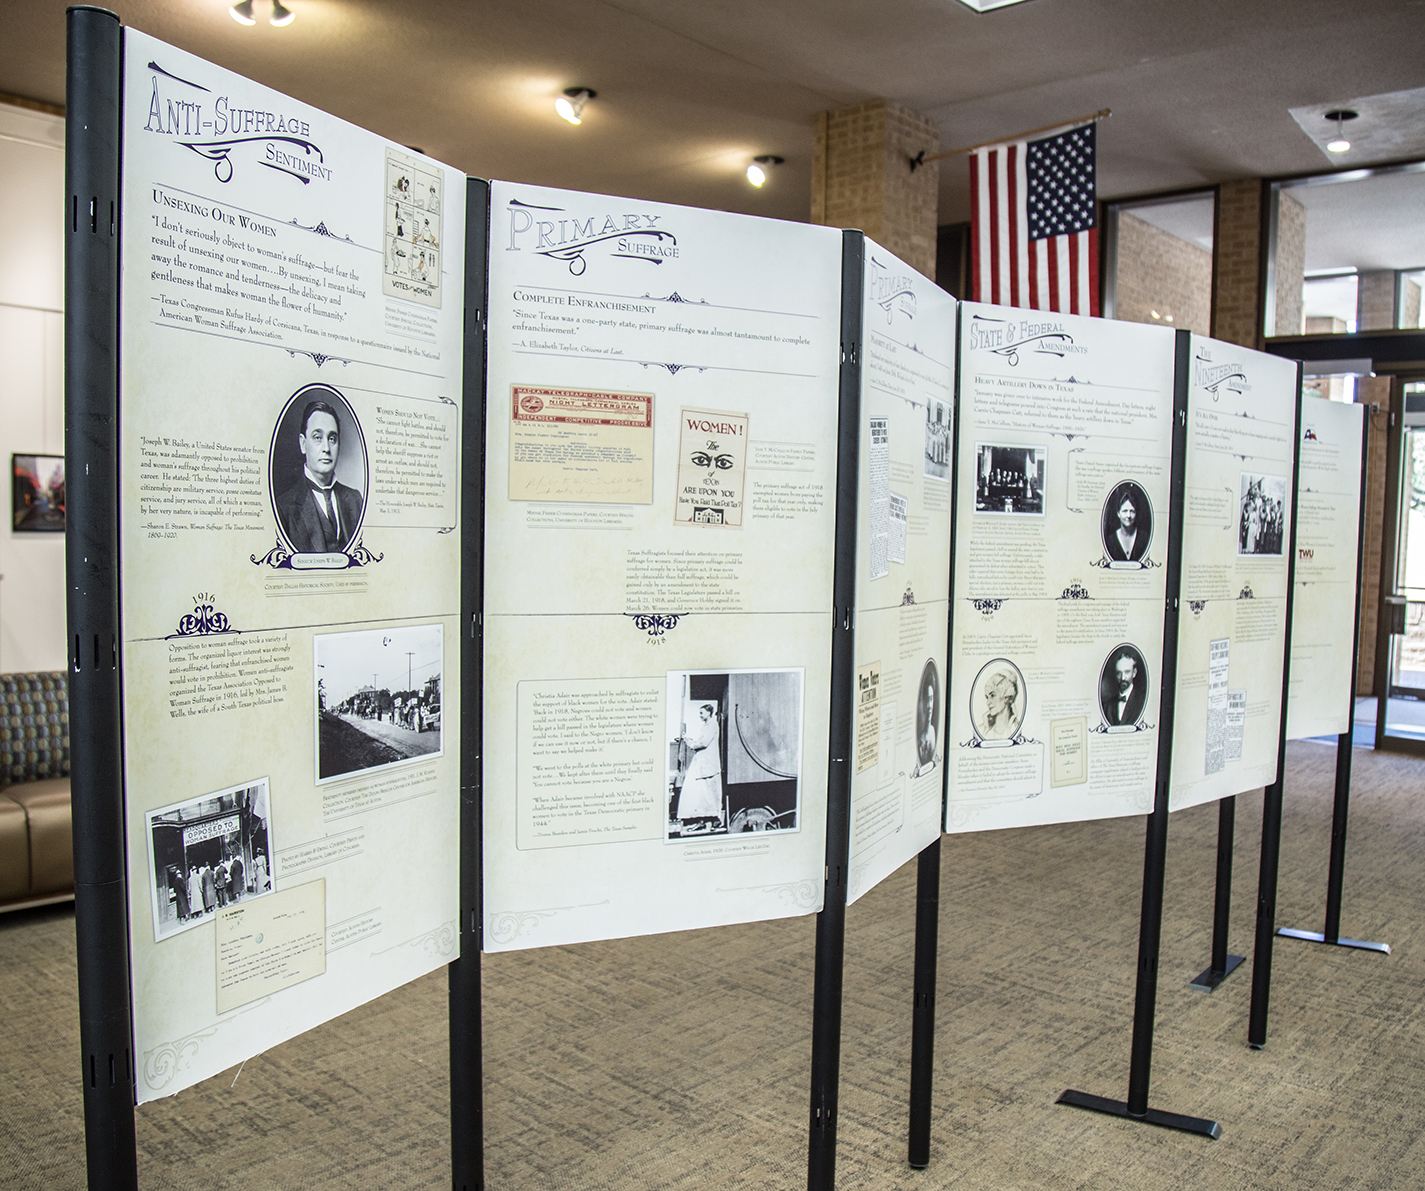 The Women’s History: Citizens at Last exhibit is open through April 25 in the J. Ardis Bell Library (NLIB 2100). The display focuses on the women’s suffrage movement in Texas.